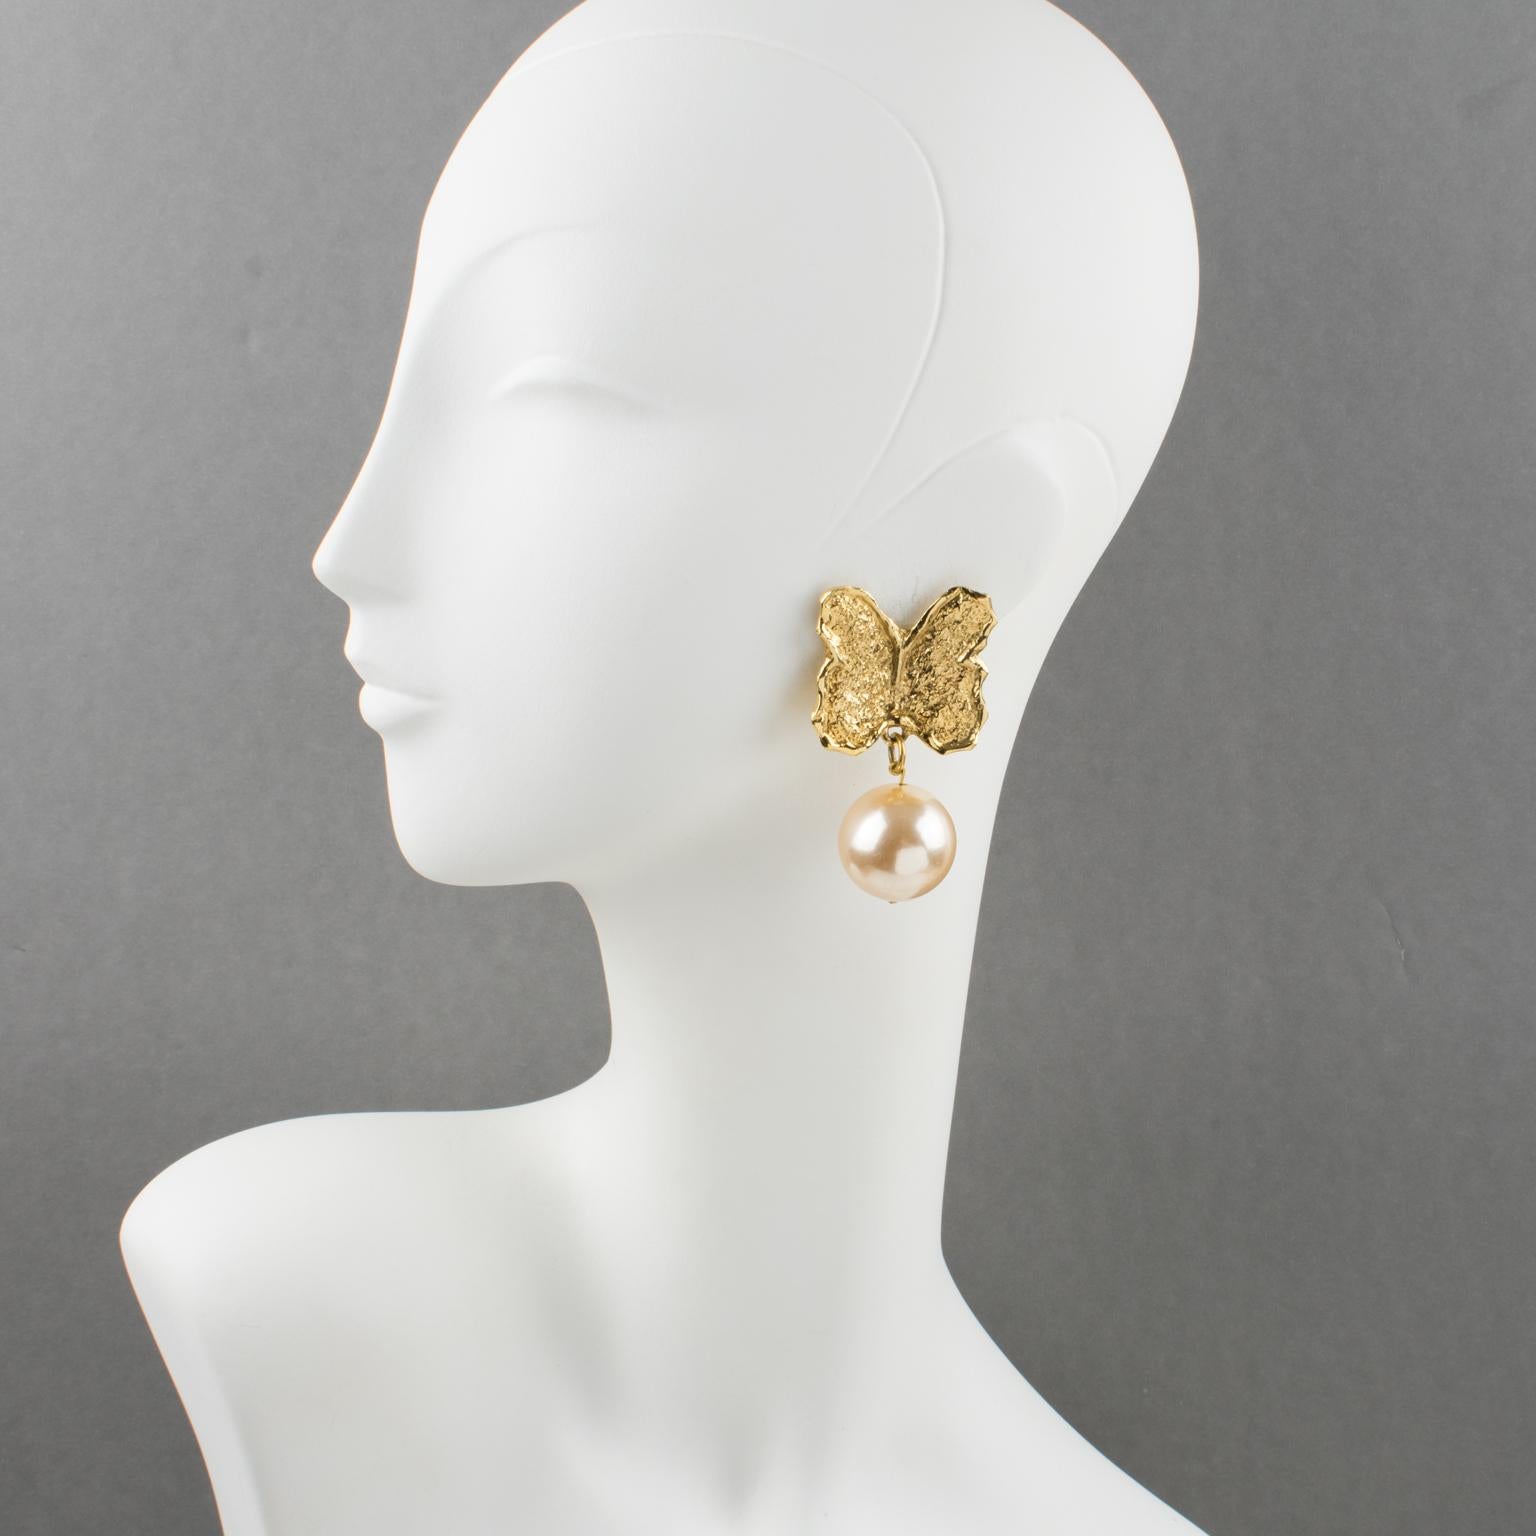 These elegant Guy Laroche Paris butterfly clip-on earrings feature an oversized dangling shape with a carved and textured gilt metal butterfly, ornate with an impressive pearl imitation in powder pink color. The engraved signature at the back reads